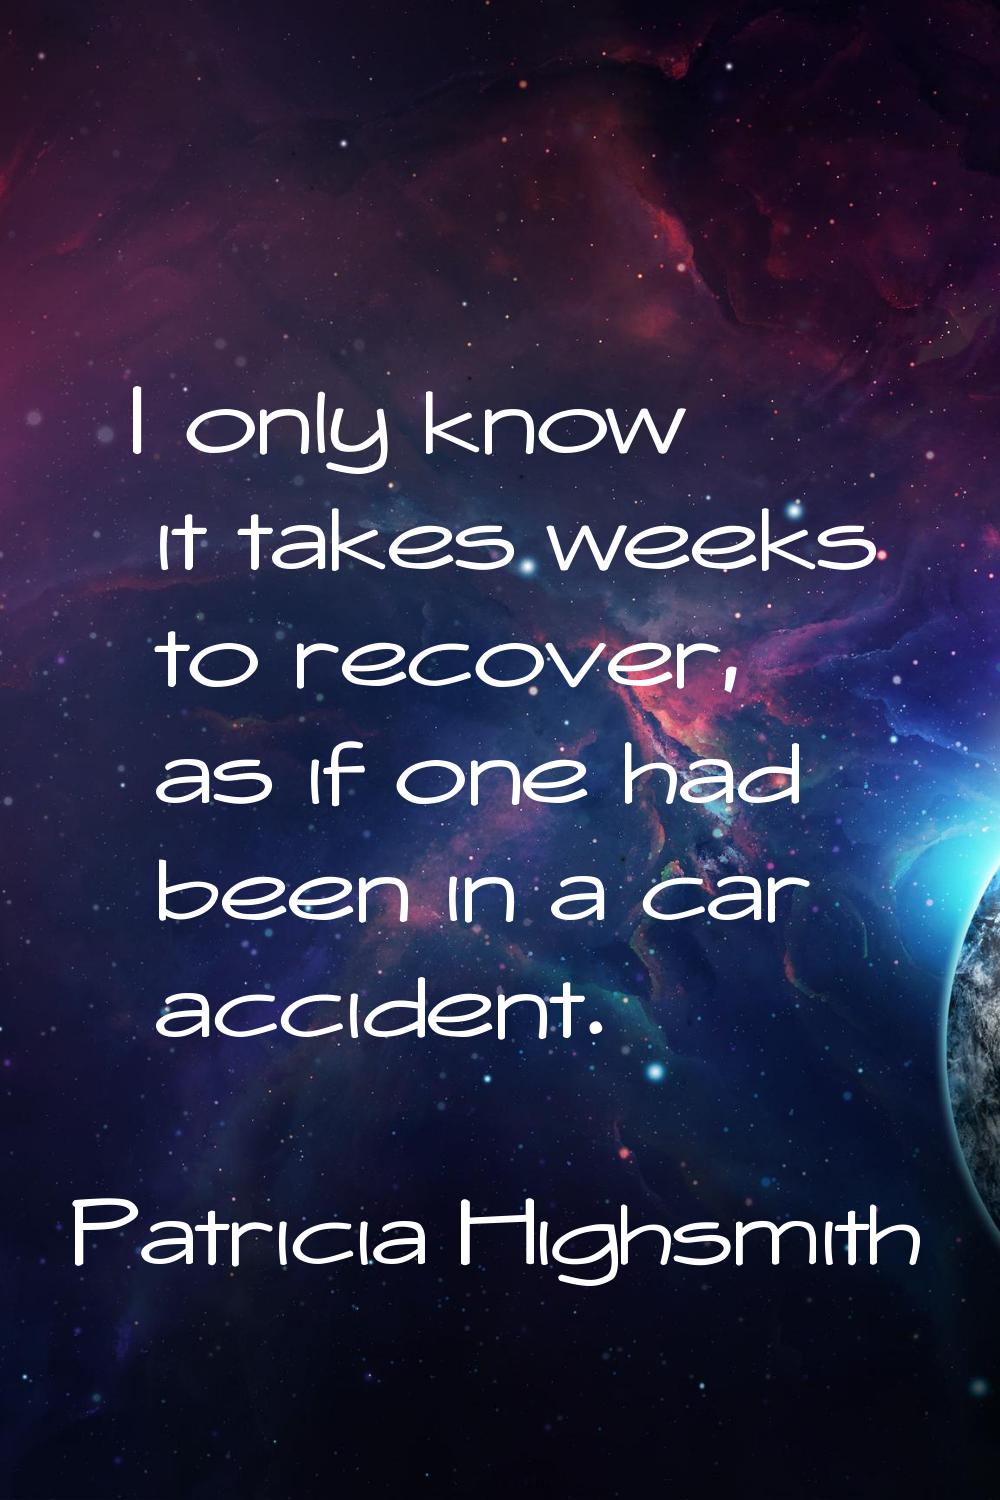 I only know it takes weeks to recover, as if one had been in a car accident.